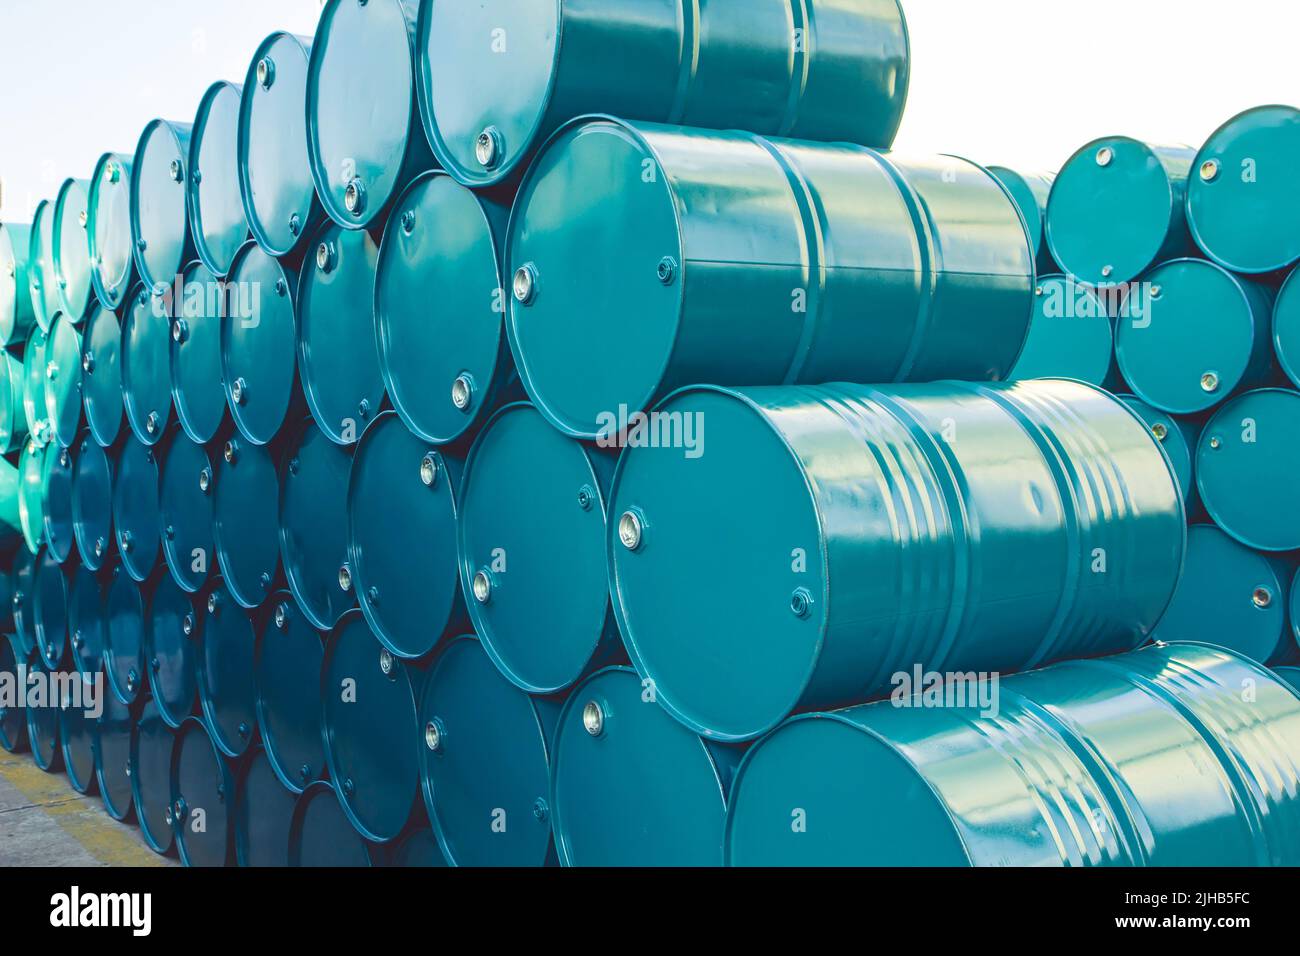 https://c8.alamy.com/comp/2JHB5FC/oil-barrels-green-or-chemical-drums-horizontal-stacked-up-2JHB5FC.jpg